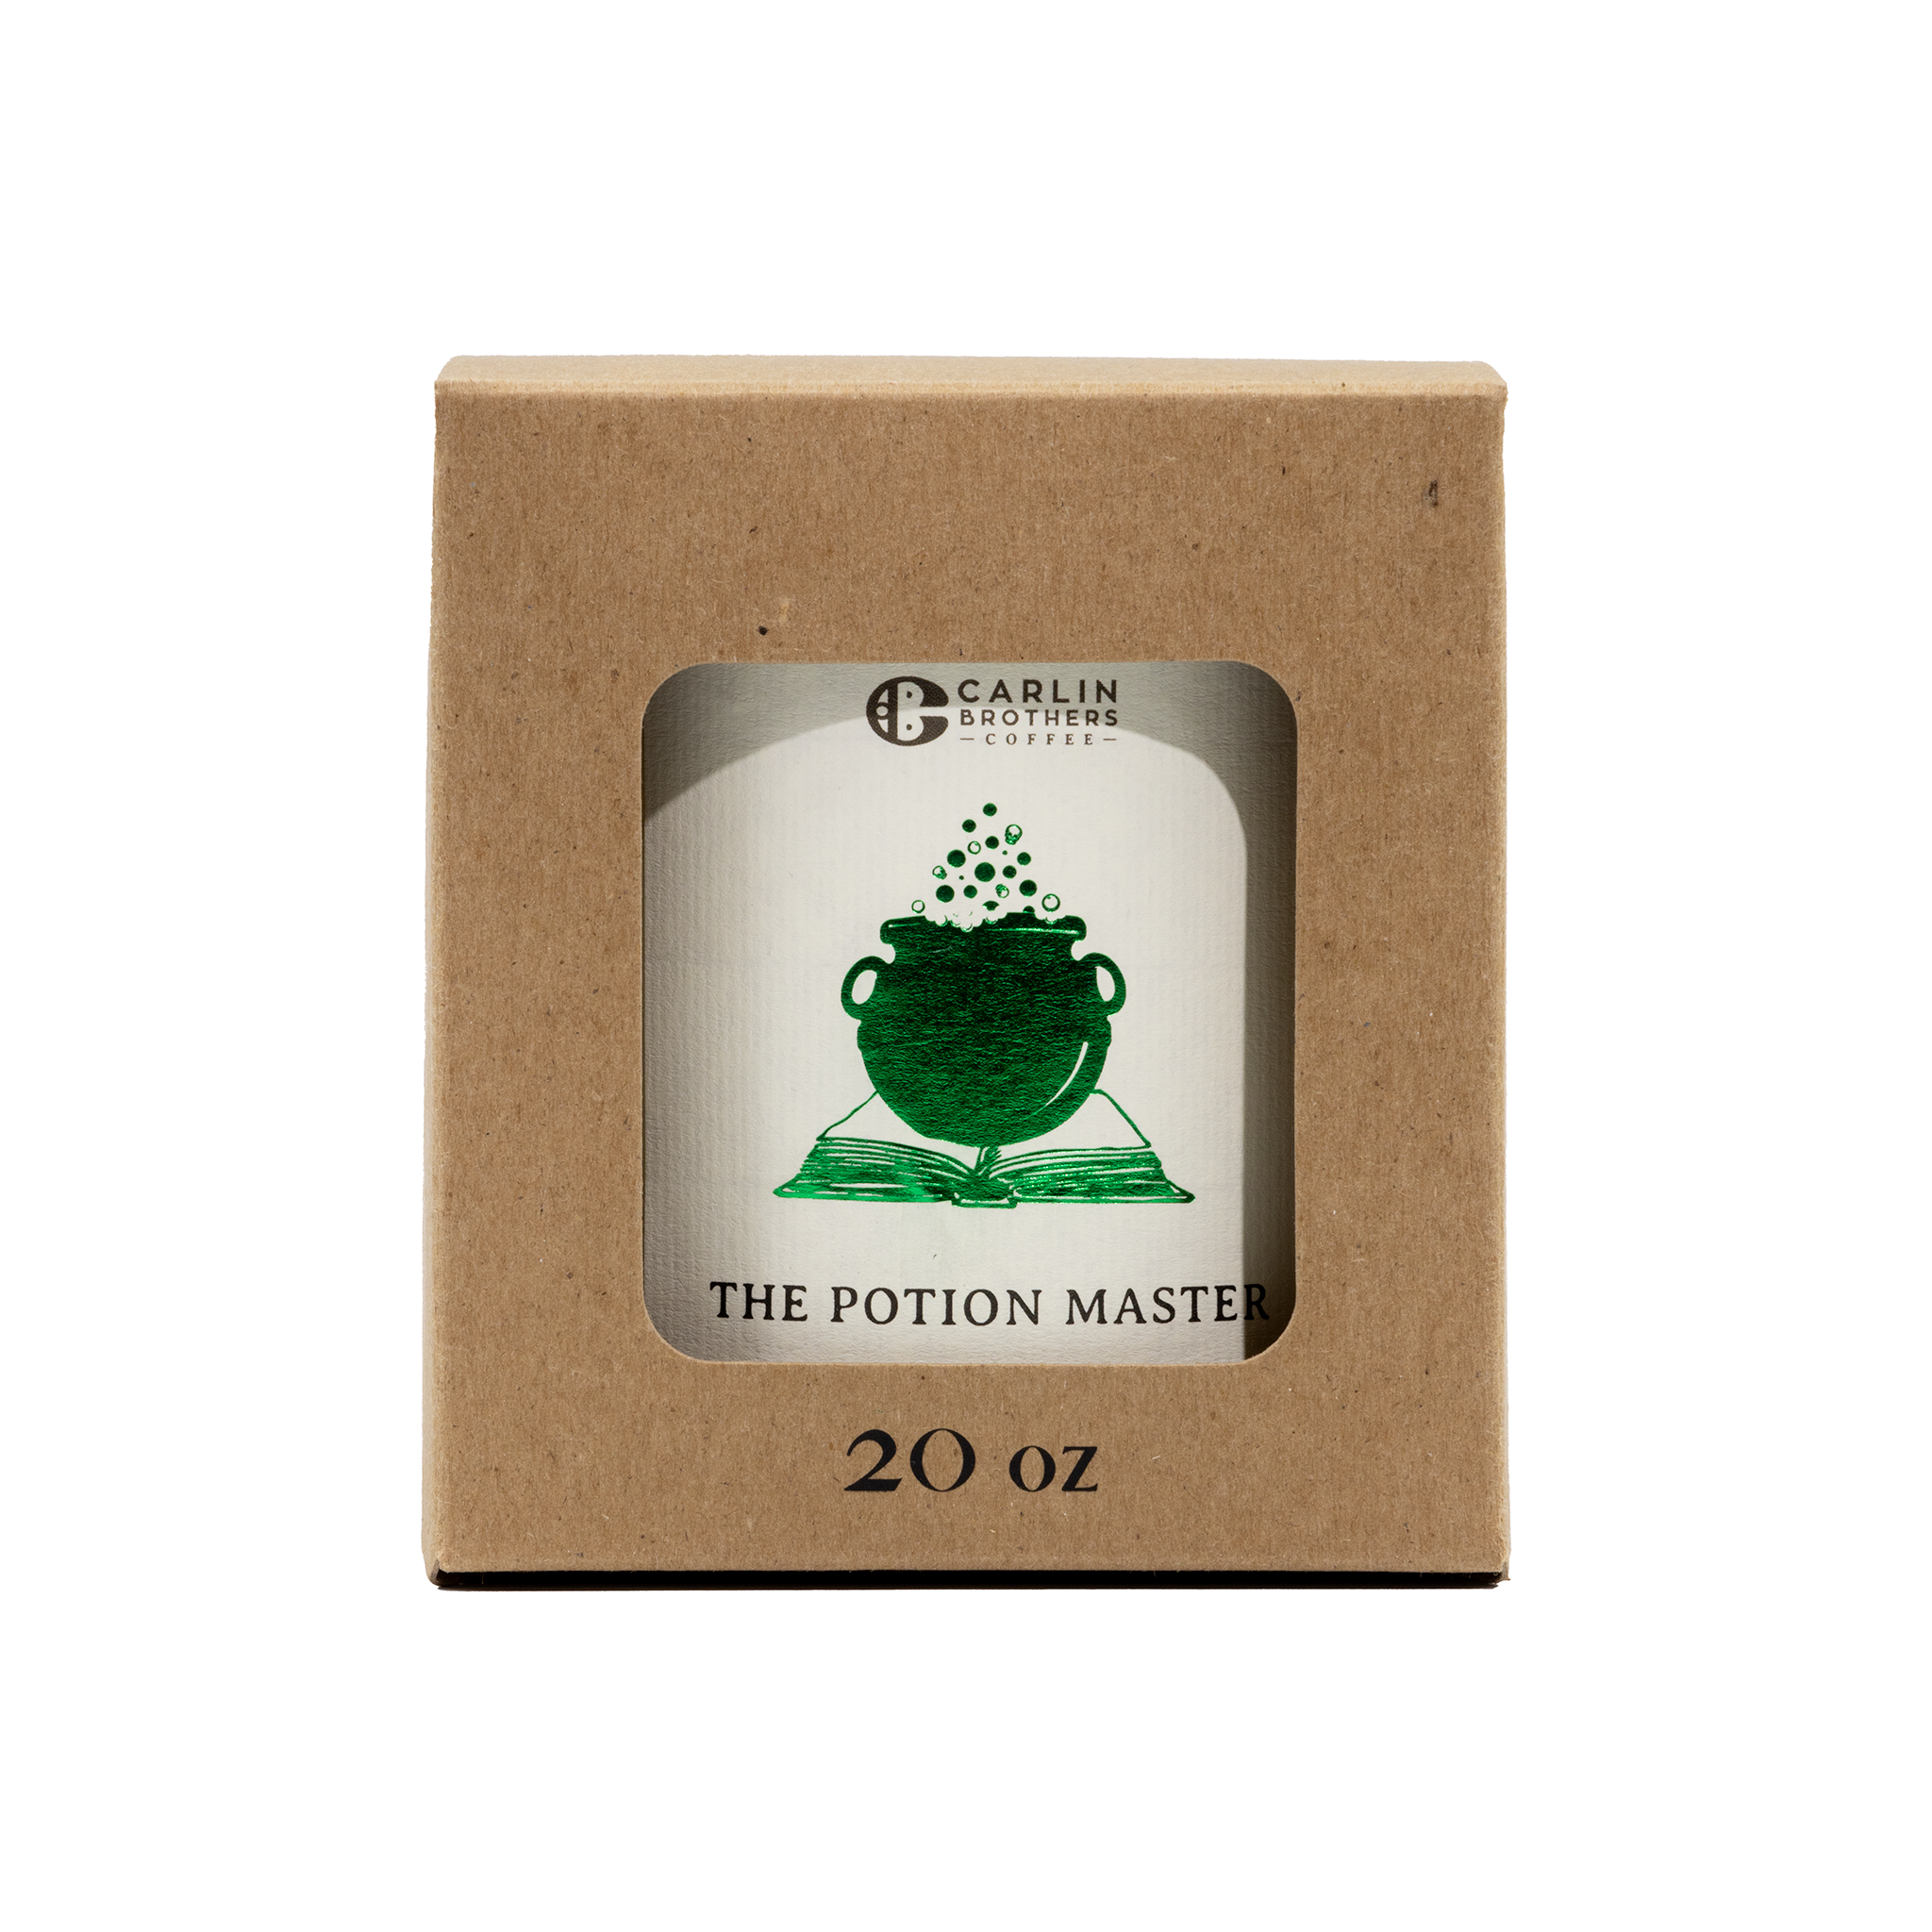 The Potion Master Wizarding Candle in box Super Carlin Brothers Mercantile